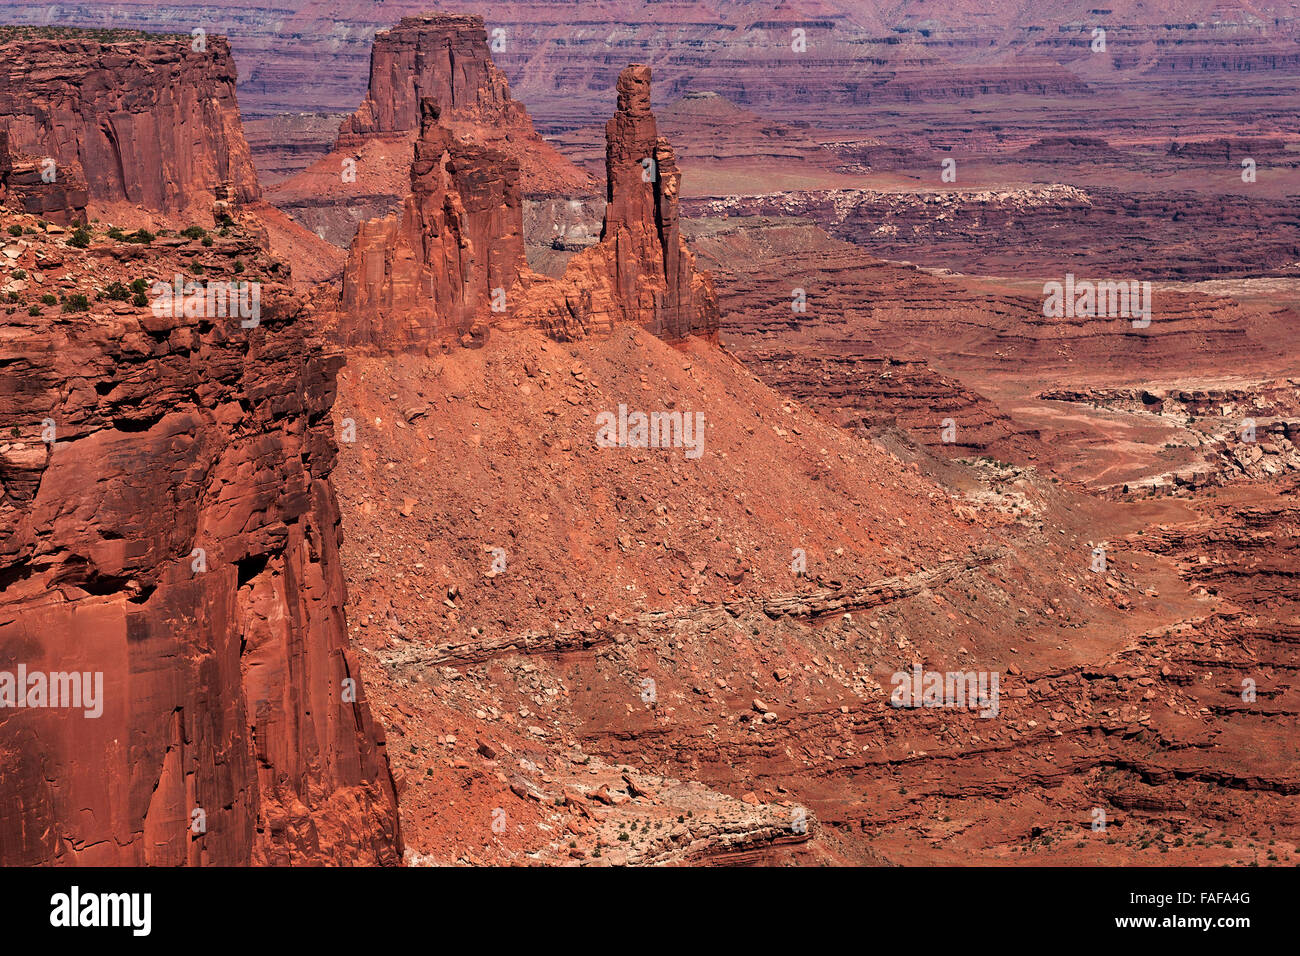 View of eroded landscape from Mesa Arch, rock formations, Island in the Sky, Canyonlands National Park, Utah, USA Stock Photo